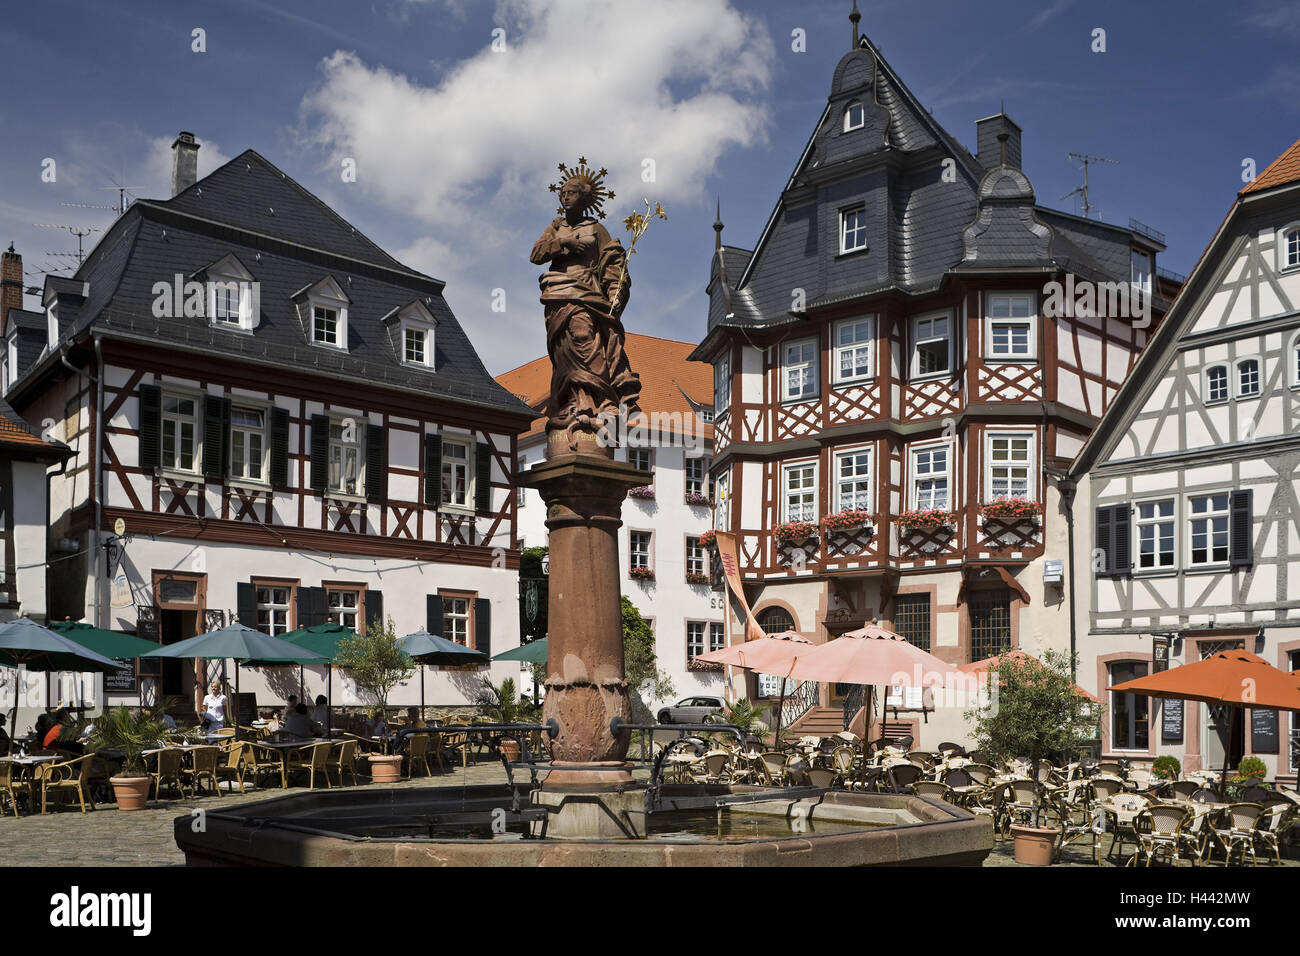 Germany, Hessen, home Heppen, marketplace, Liebighaus, well, town, architecture, building, half-timbered, market, half-timbered houses, half-timbered architecture, architecture, historically, cafes, sunshades, outside, sunny, well pillar, Stock Photo